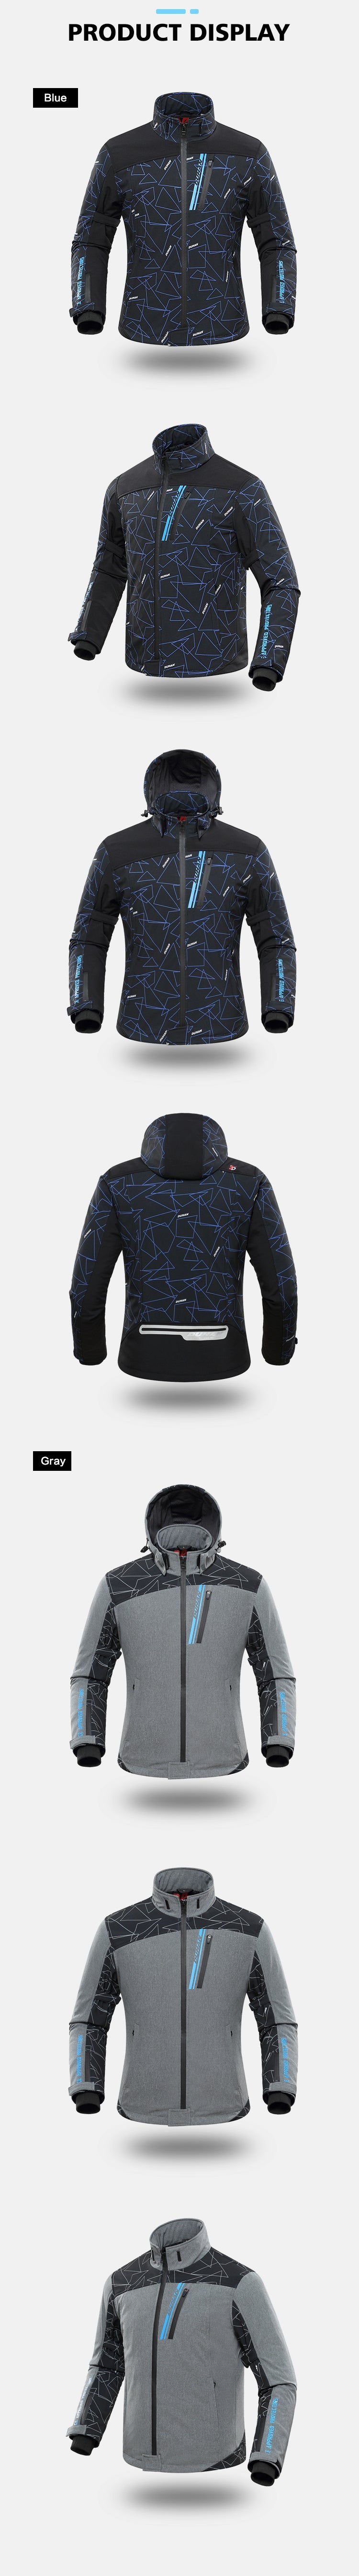 Electric Heated Motorcycle Jacket